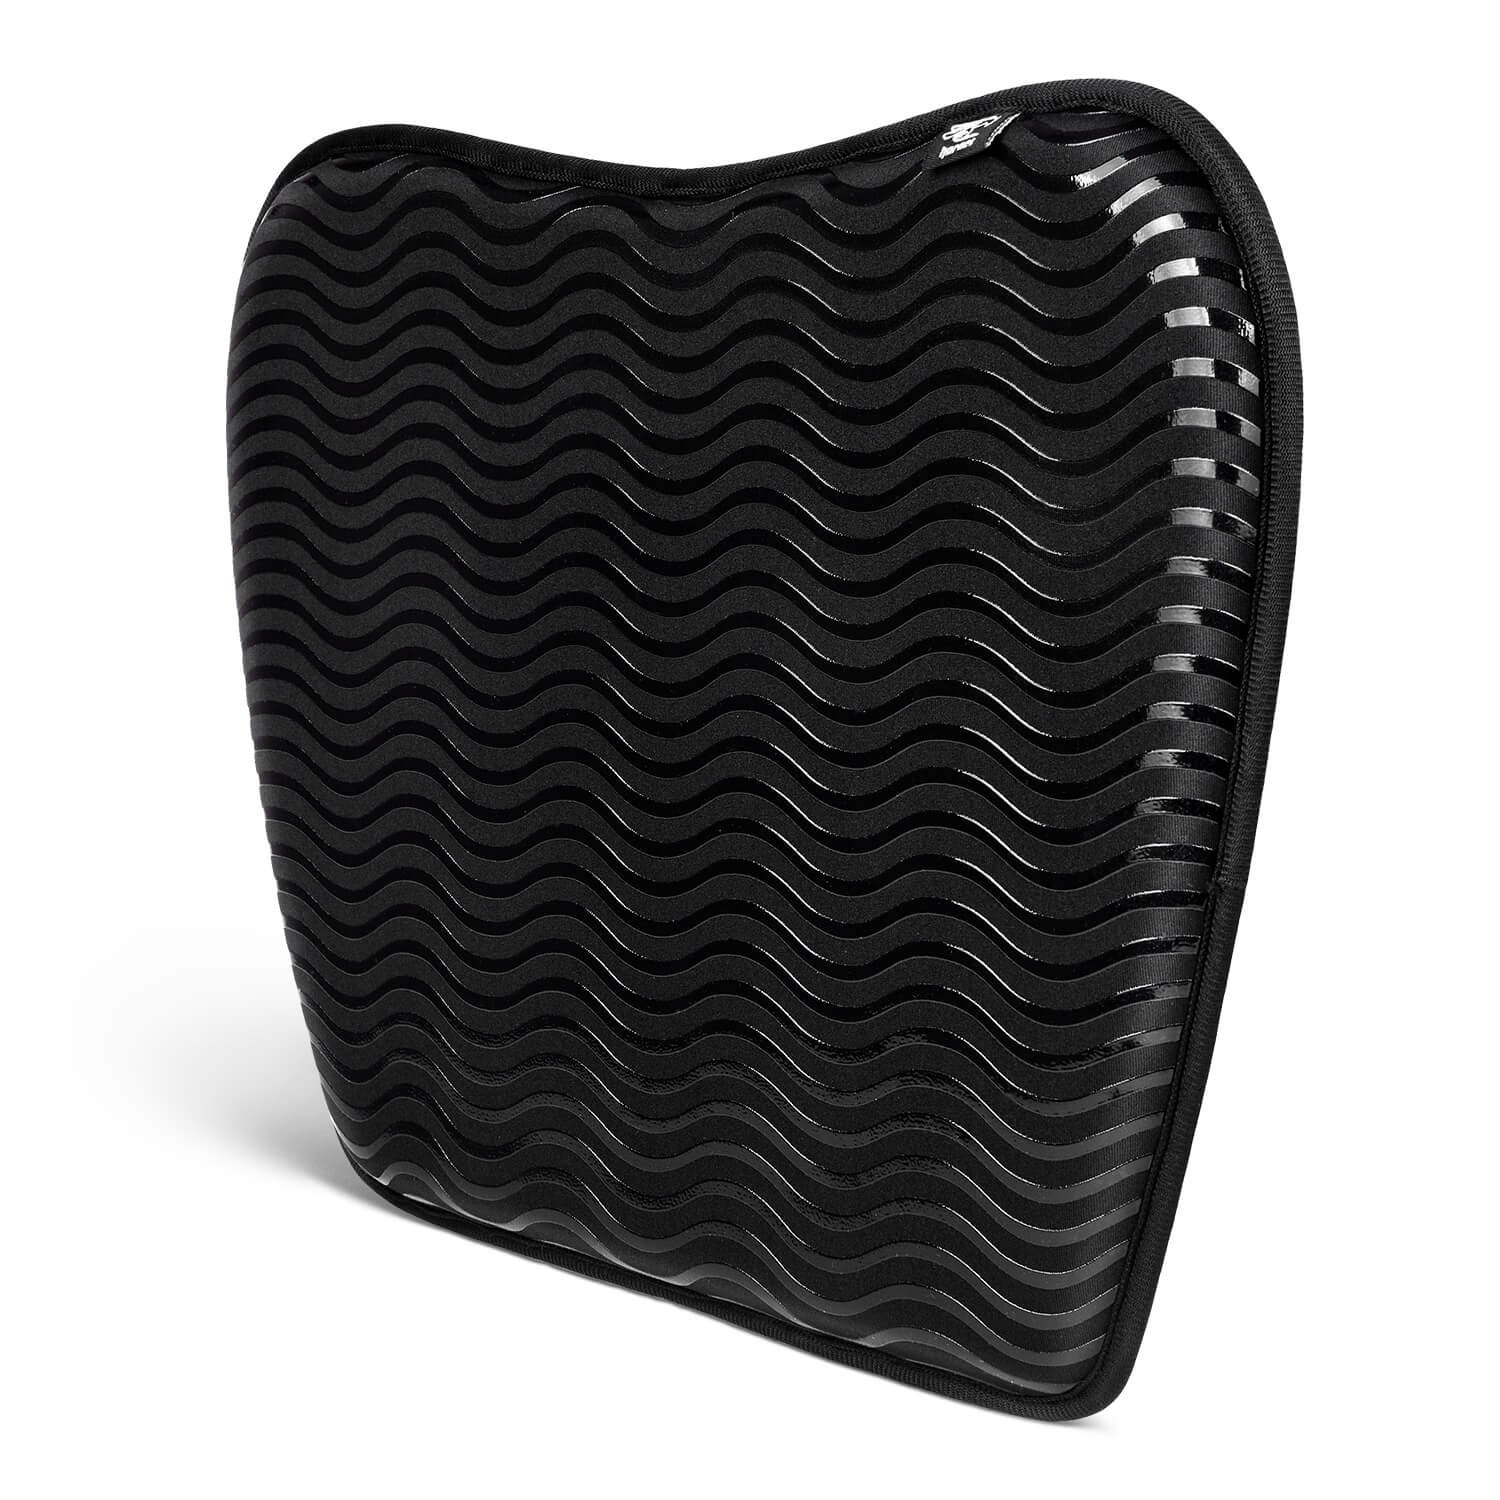 Hornet Watersports Kayak Seat Cushion - Fish Scale Design Kayak Cushion -  Kayak Seat Pad - Ideal Kayak Accessories for Men and Women